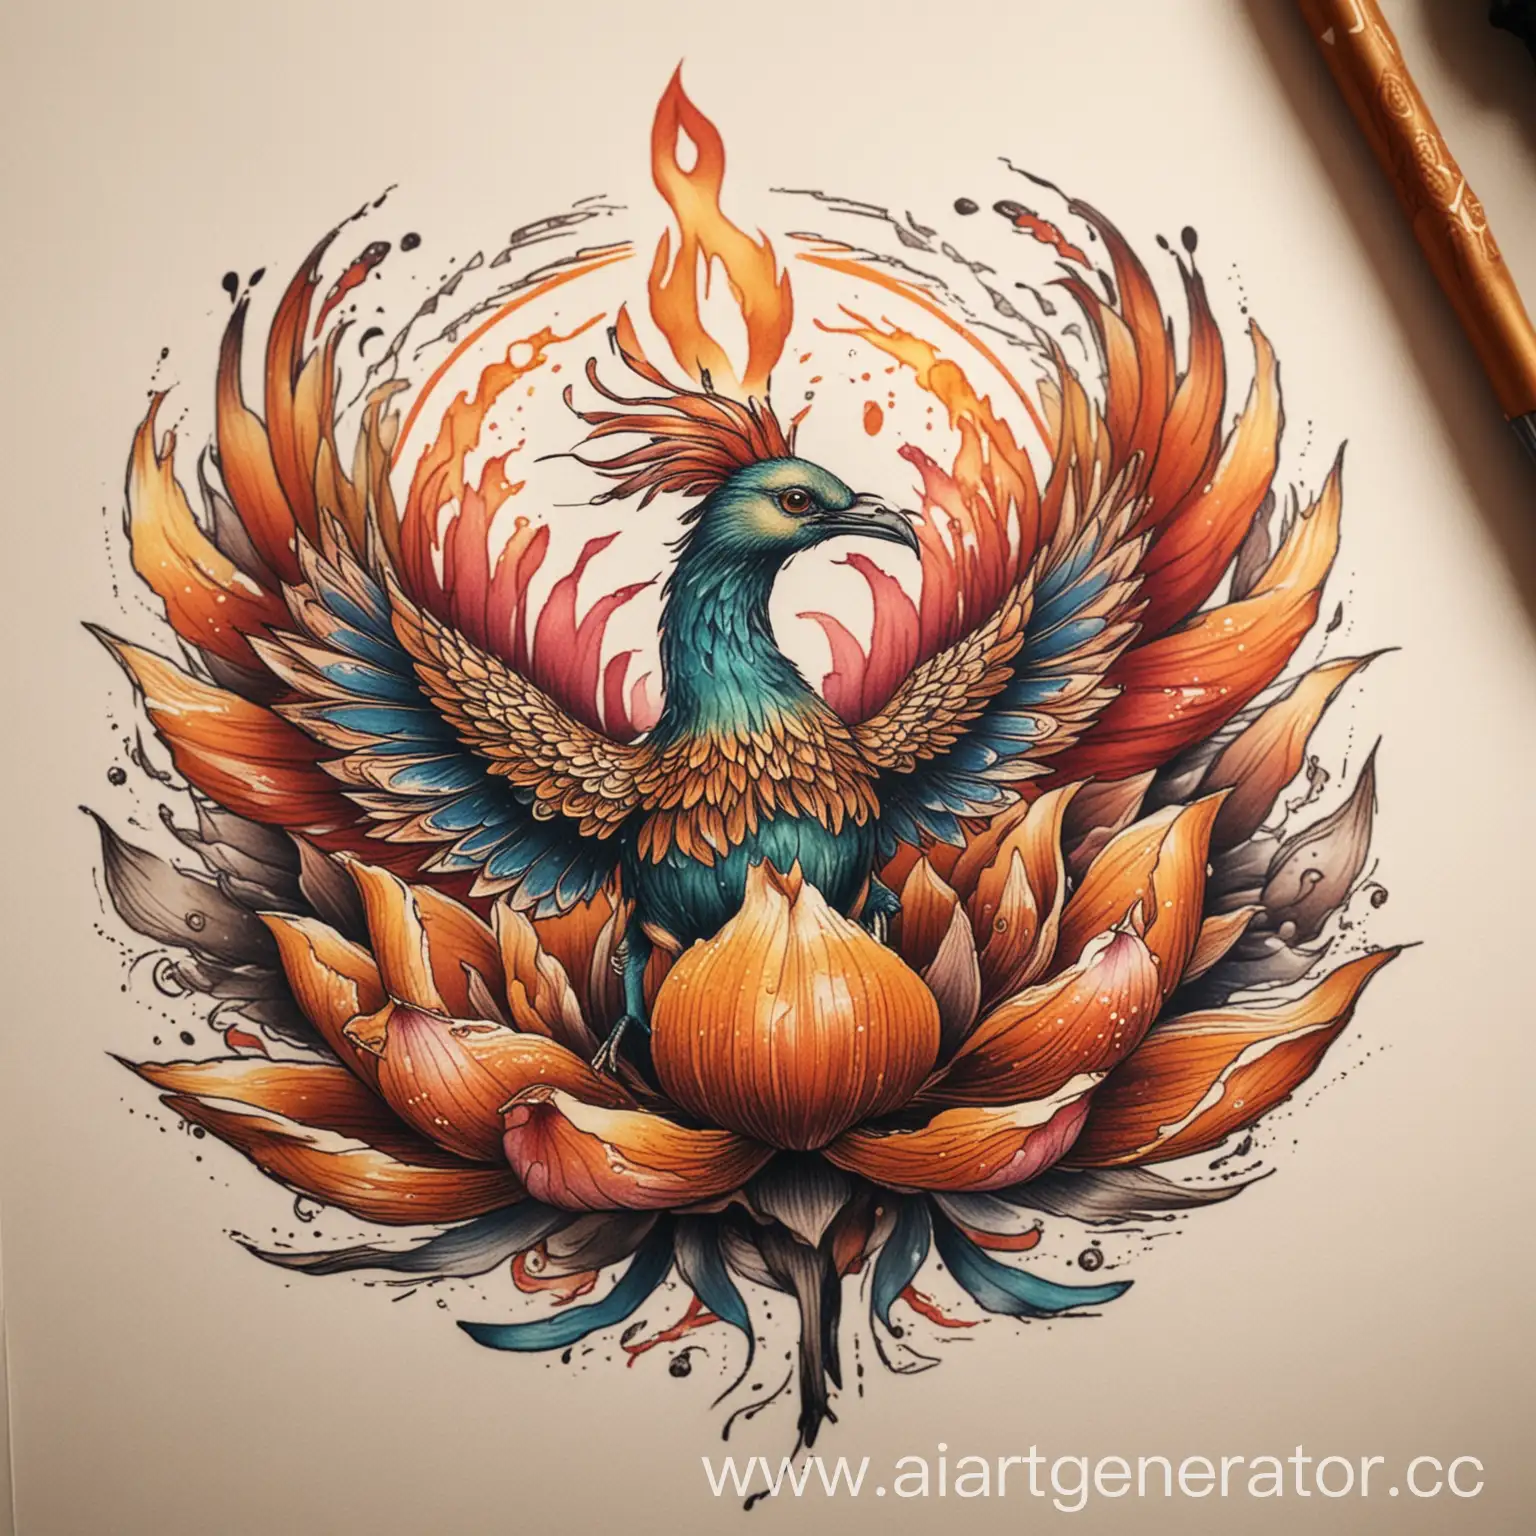 Majestic-Phoenix-Hovering-Over-Lotus-Vibrant-Graphic-Illustration-with-Intricate-Tattoo-Sketch-Details